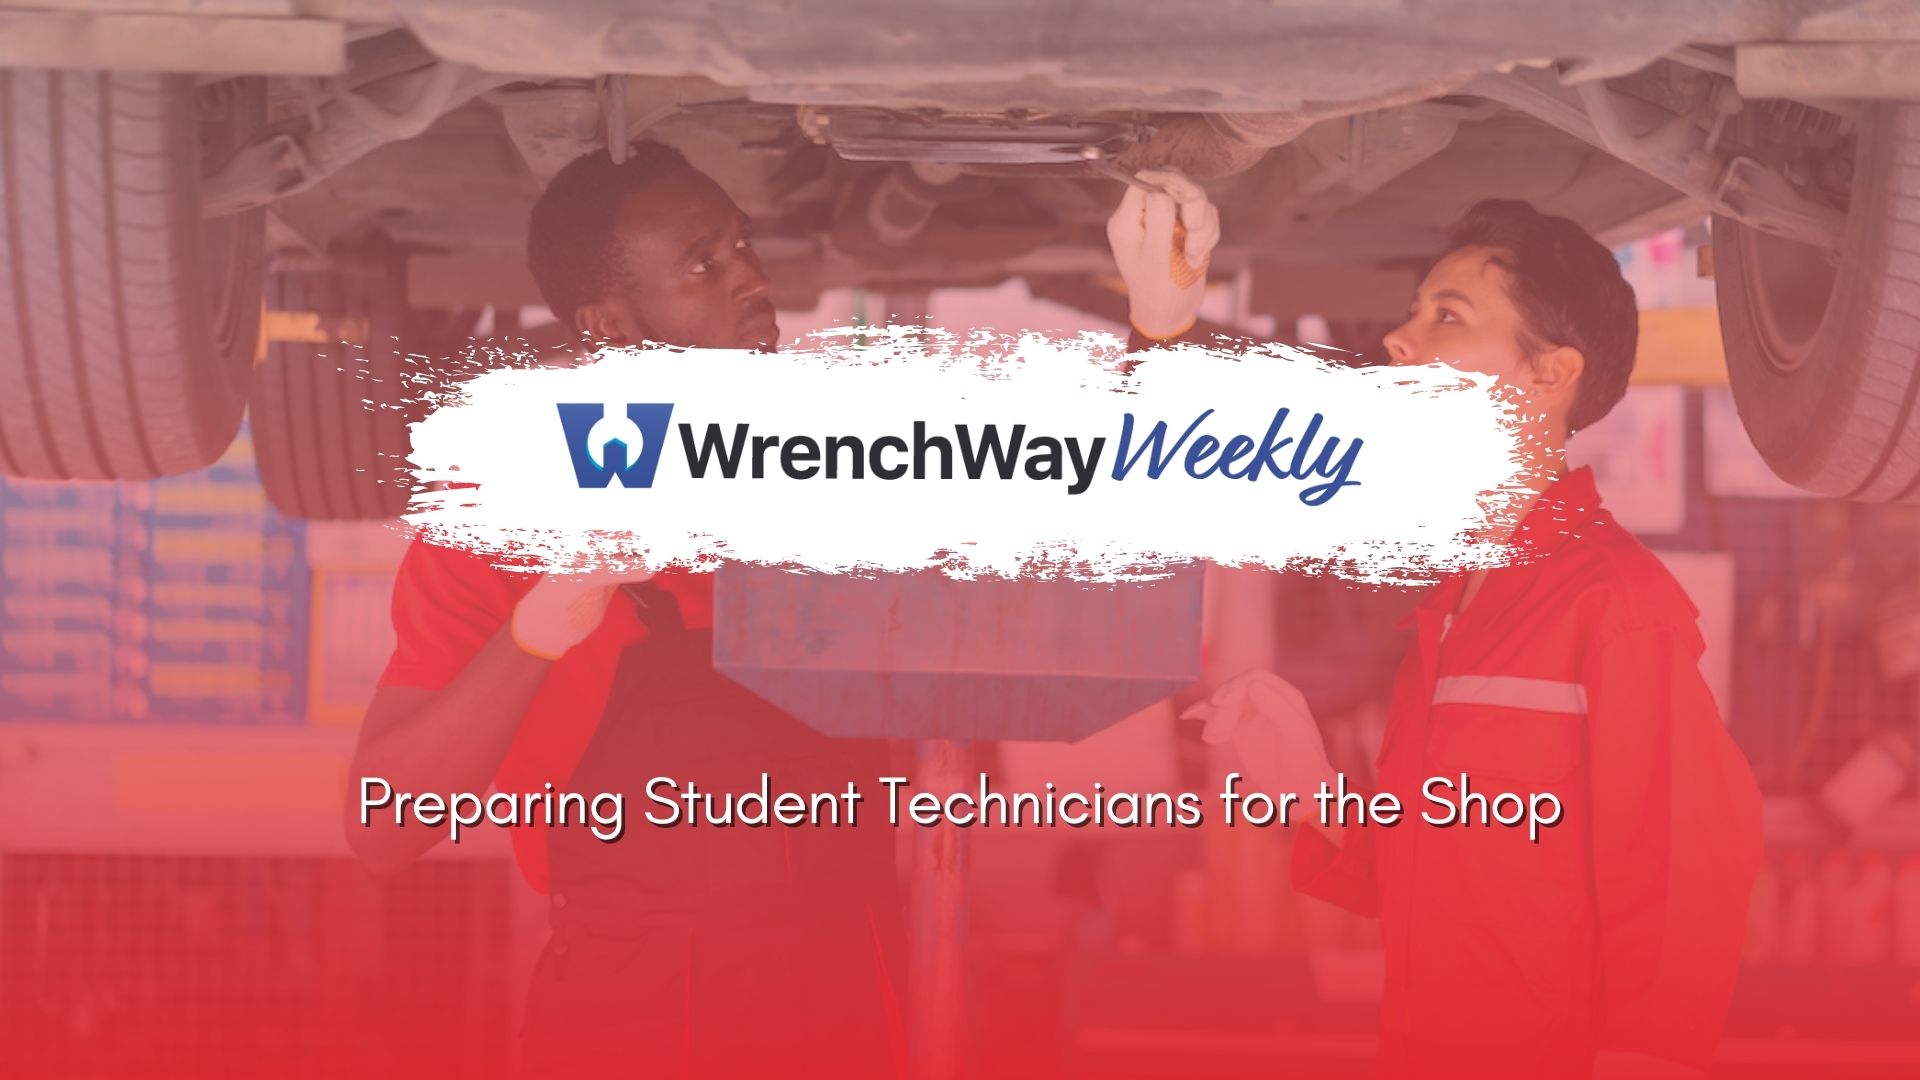 wrenchway weekly episode on preparing student technicians for the shop